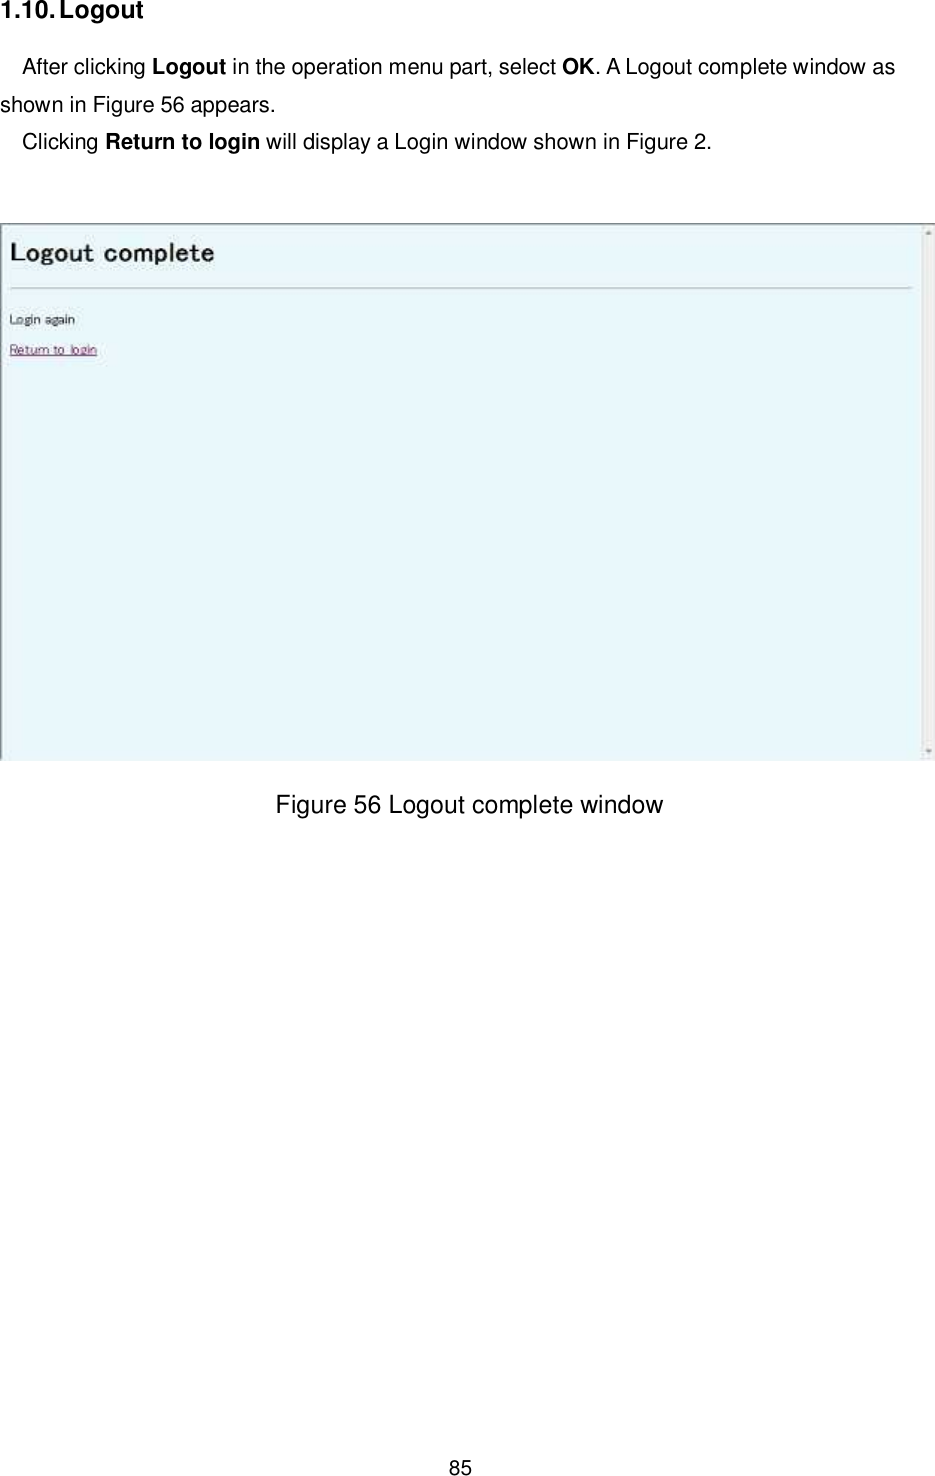    85  1.10. Logout After clicking Logout in the operation menu part, select OK. A Logout complete window as shown in Figure 56 appears. Clicking Return to login will display a Login window shown in Figure 2.   Figure 56 Logout complete window 